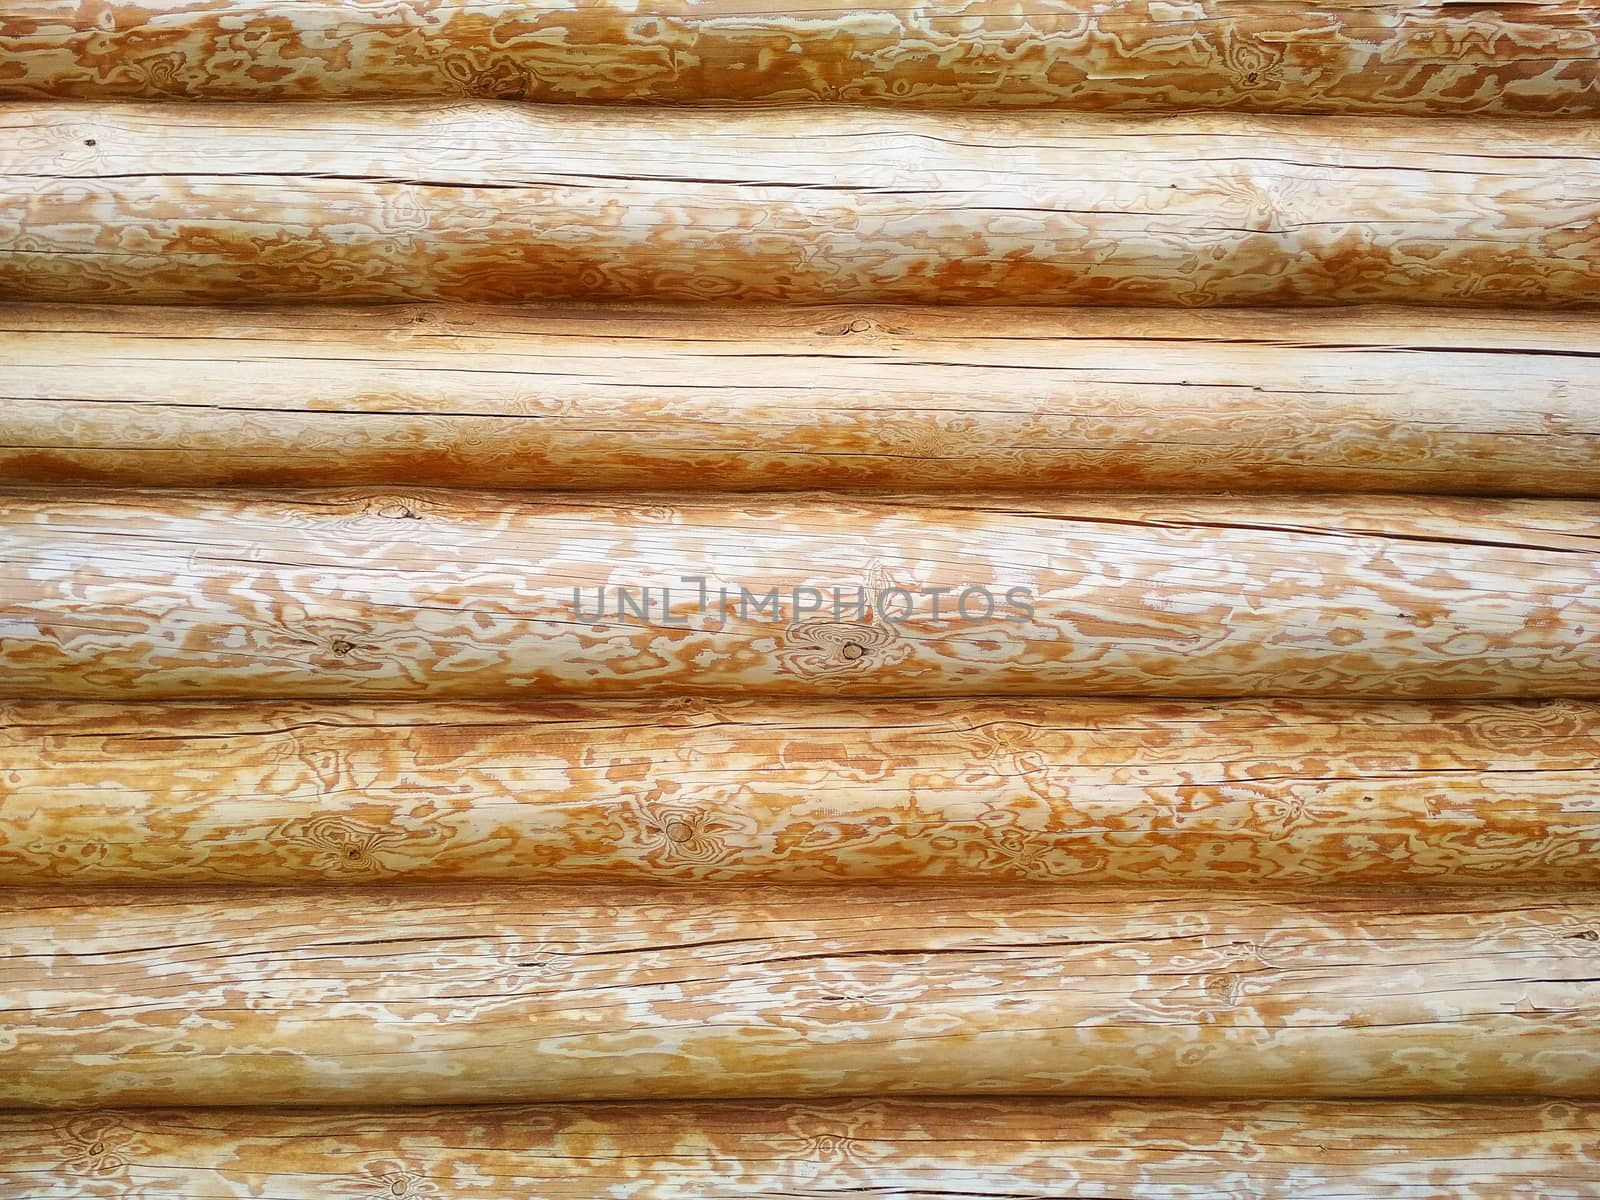 The wall of pine logs with a pronounced structure of light color.